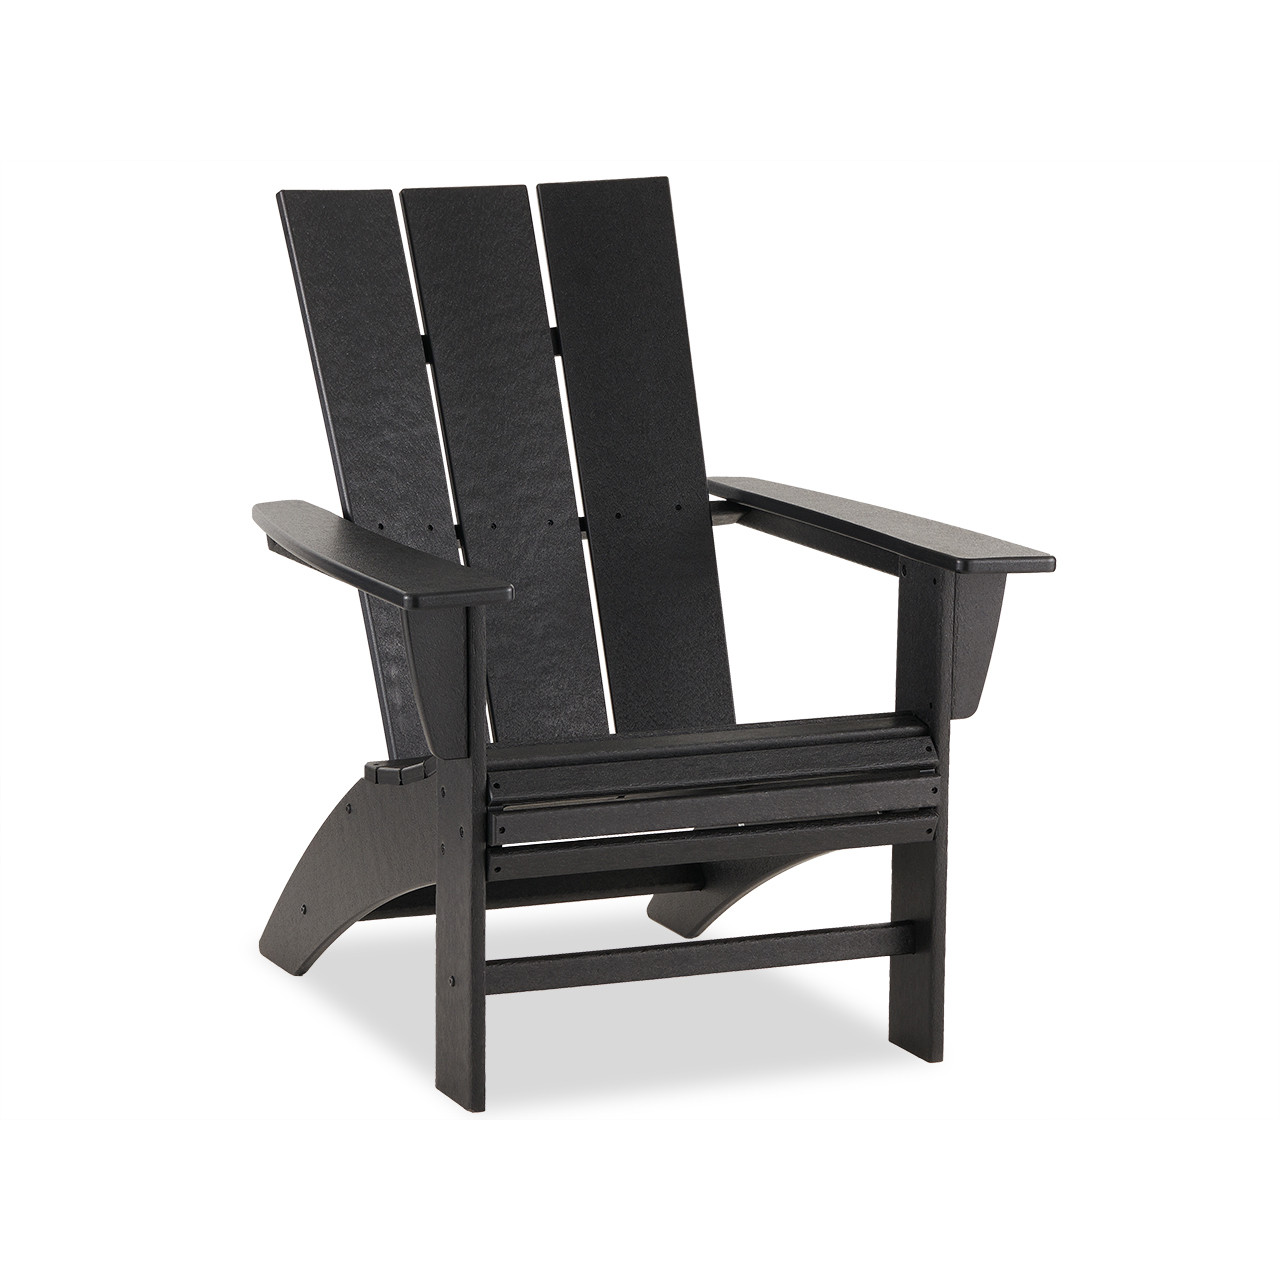 POLYWOOD Black Polymer 3 Pc. Adirondack Set with 39 in. H Chiminea Fire Pit